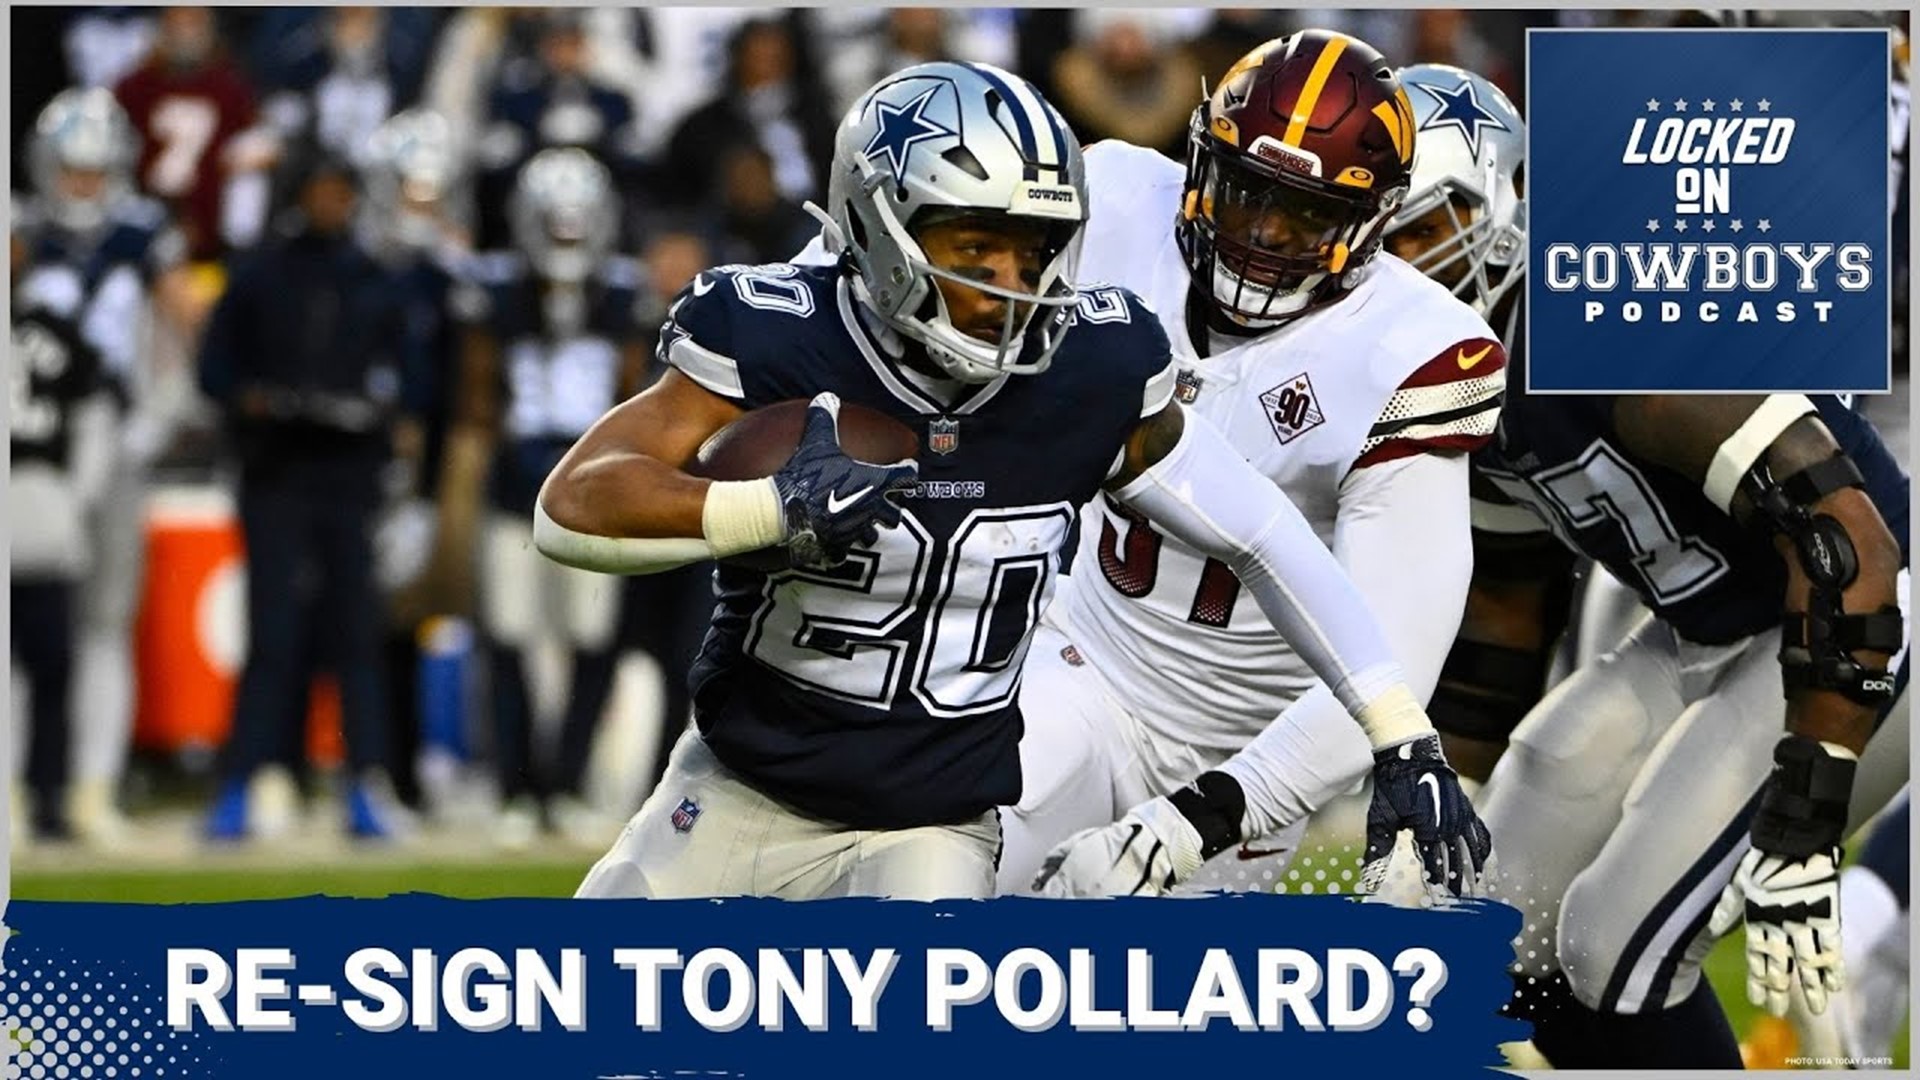 Marcus Mosher and Landon McCool recap the running back position for the Cowboys in 2022. They discuss Ezekiel Elliott's decline, Tony Pollard's future and much more.